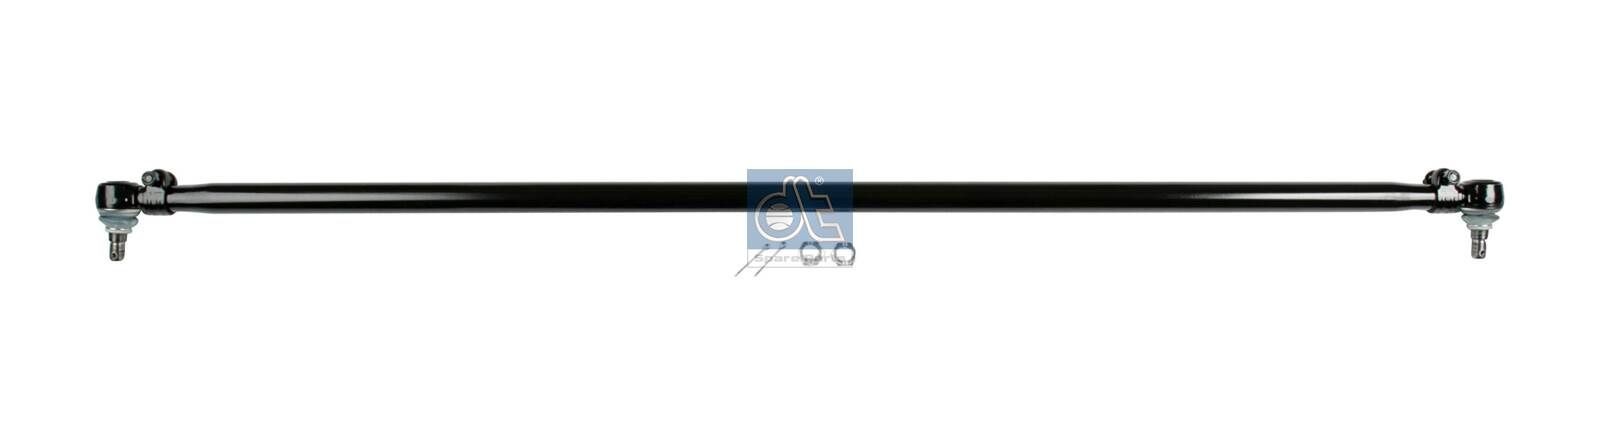 DT Spare Parts 4.65330 Rod Assembly 670 330 0303